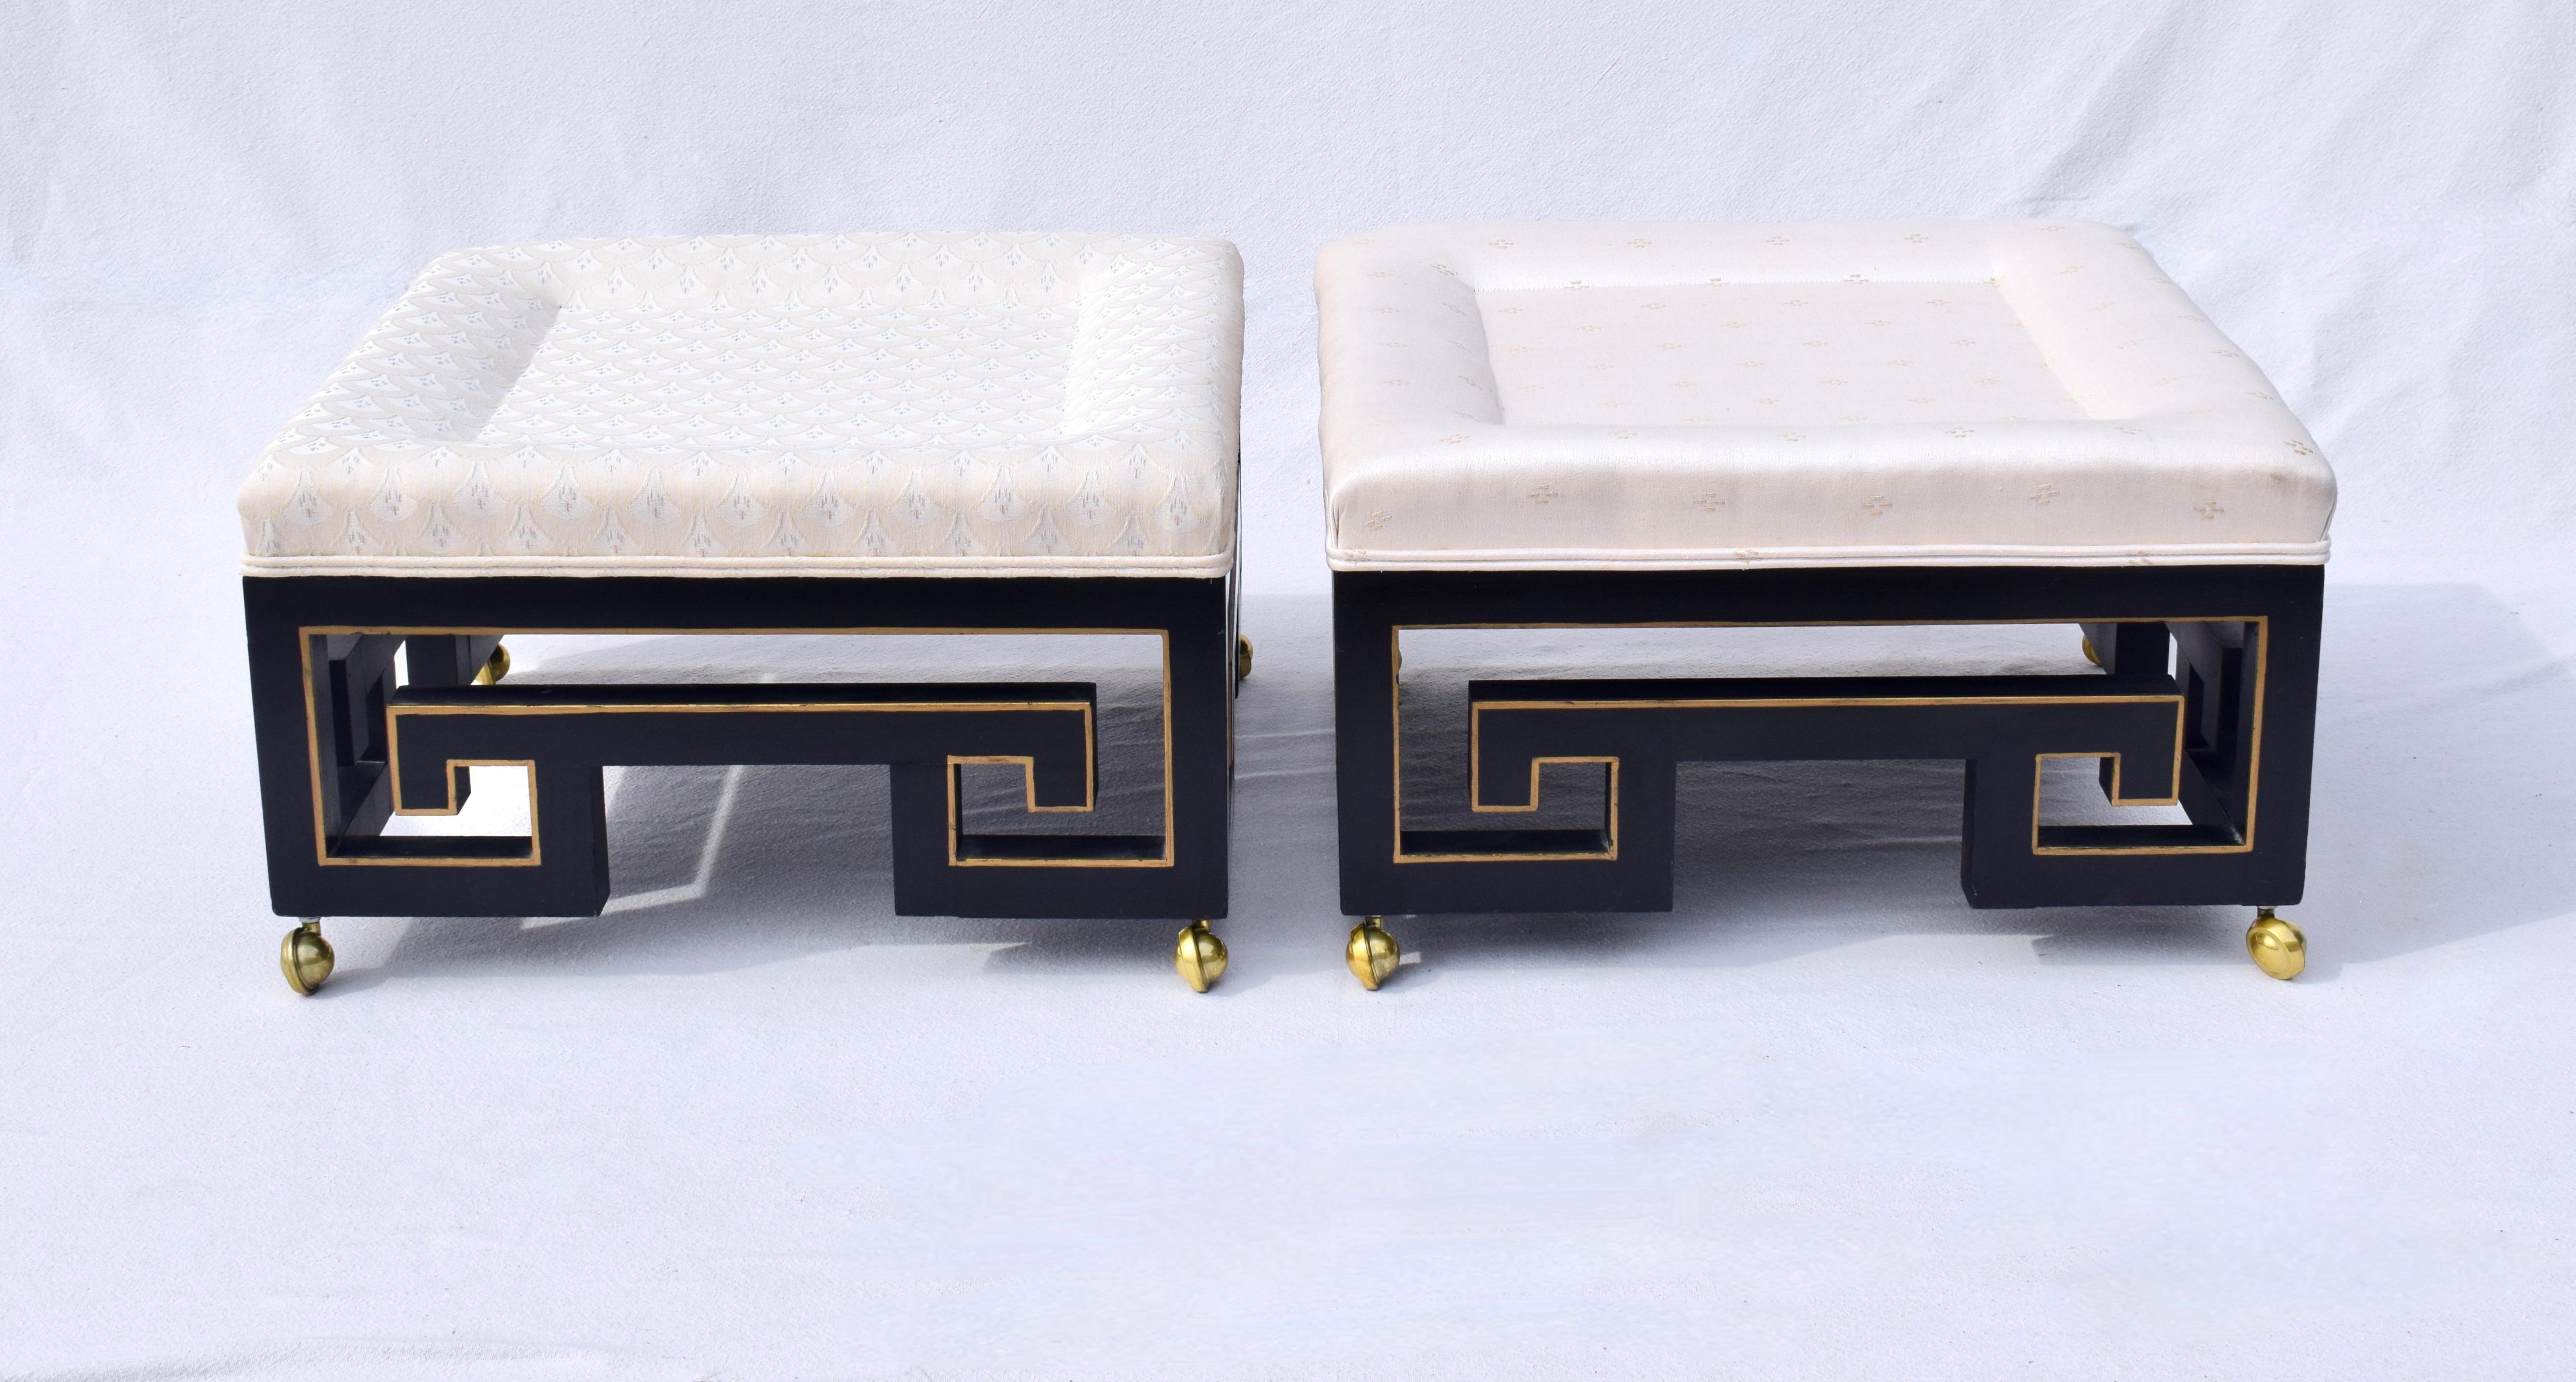 Hollywood Regency pair of ottoman stools with black lacquered Greek key bases and gold accents on brass casters. Marvelous larger scale & quality after James Mont, Dorothy Draper, Barbara Barry, Billy Haines, Billy Baldwin, Tommi Parzinger. 